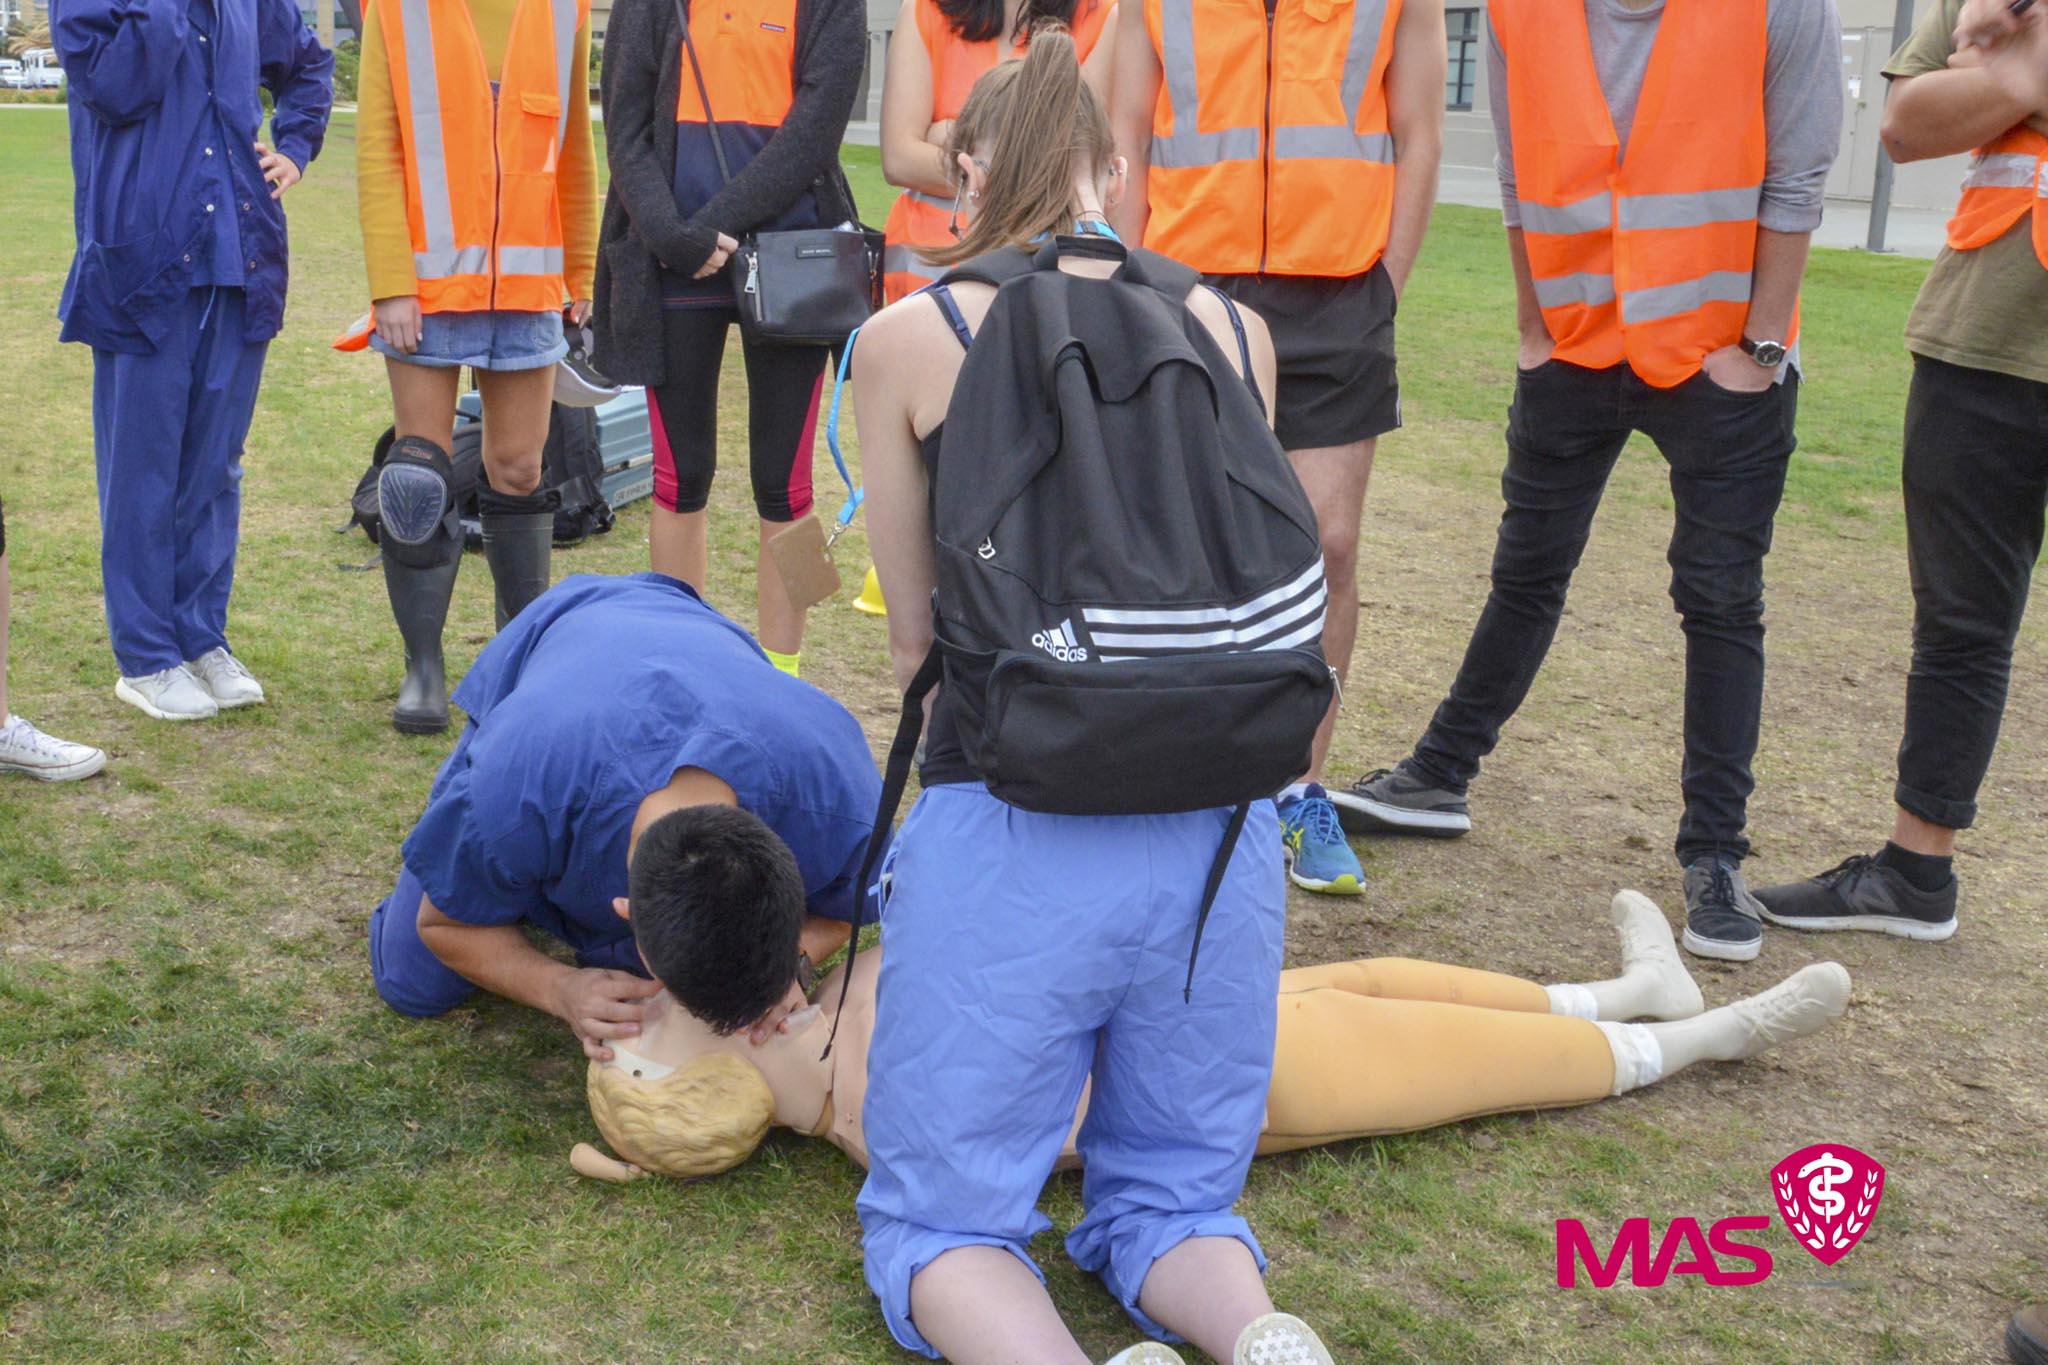 NZ Medical students teams outdoors rescue CPR